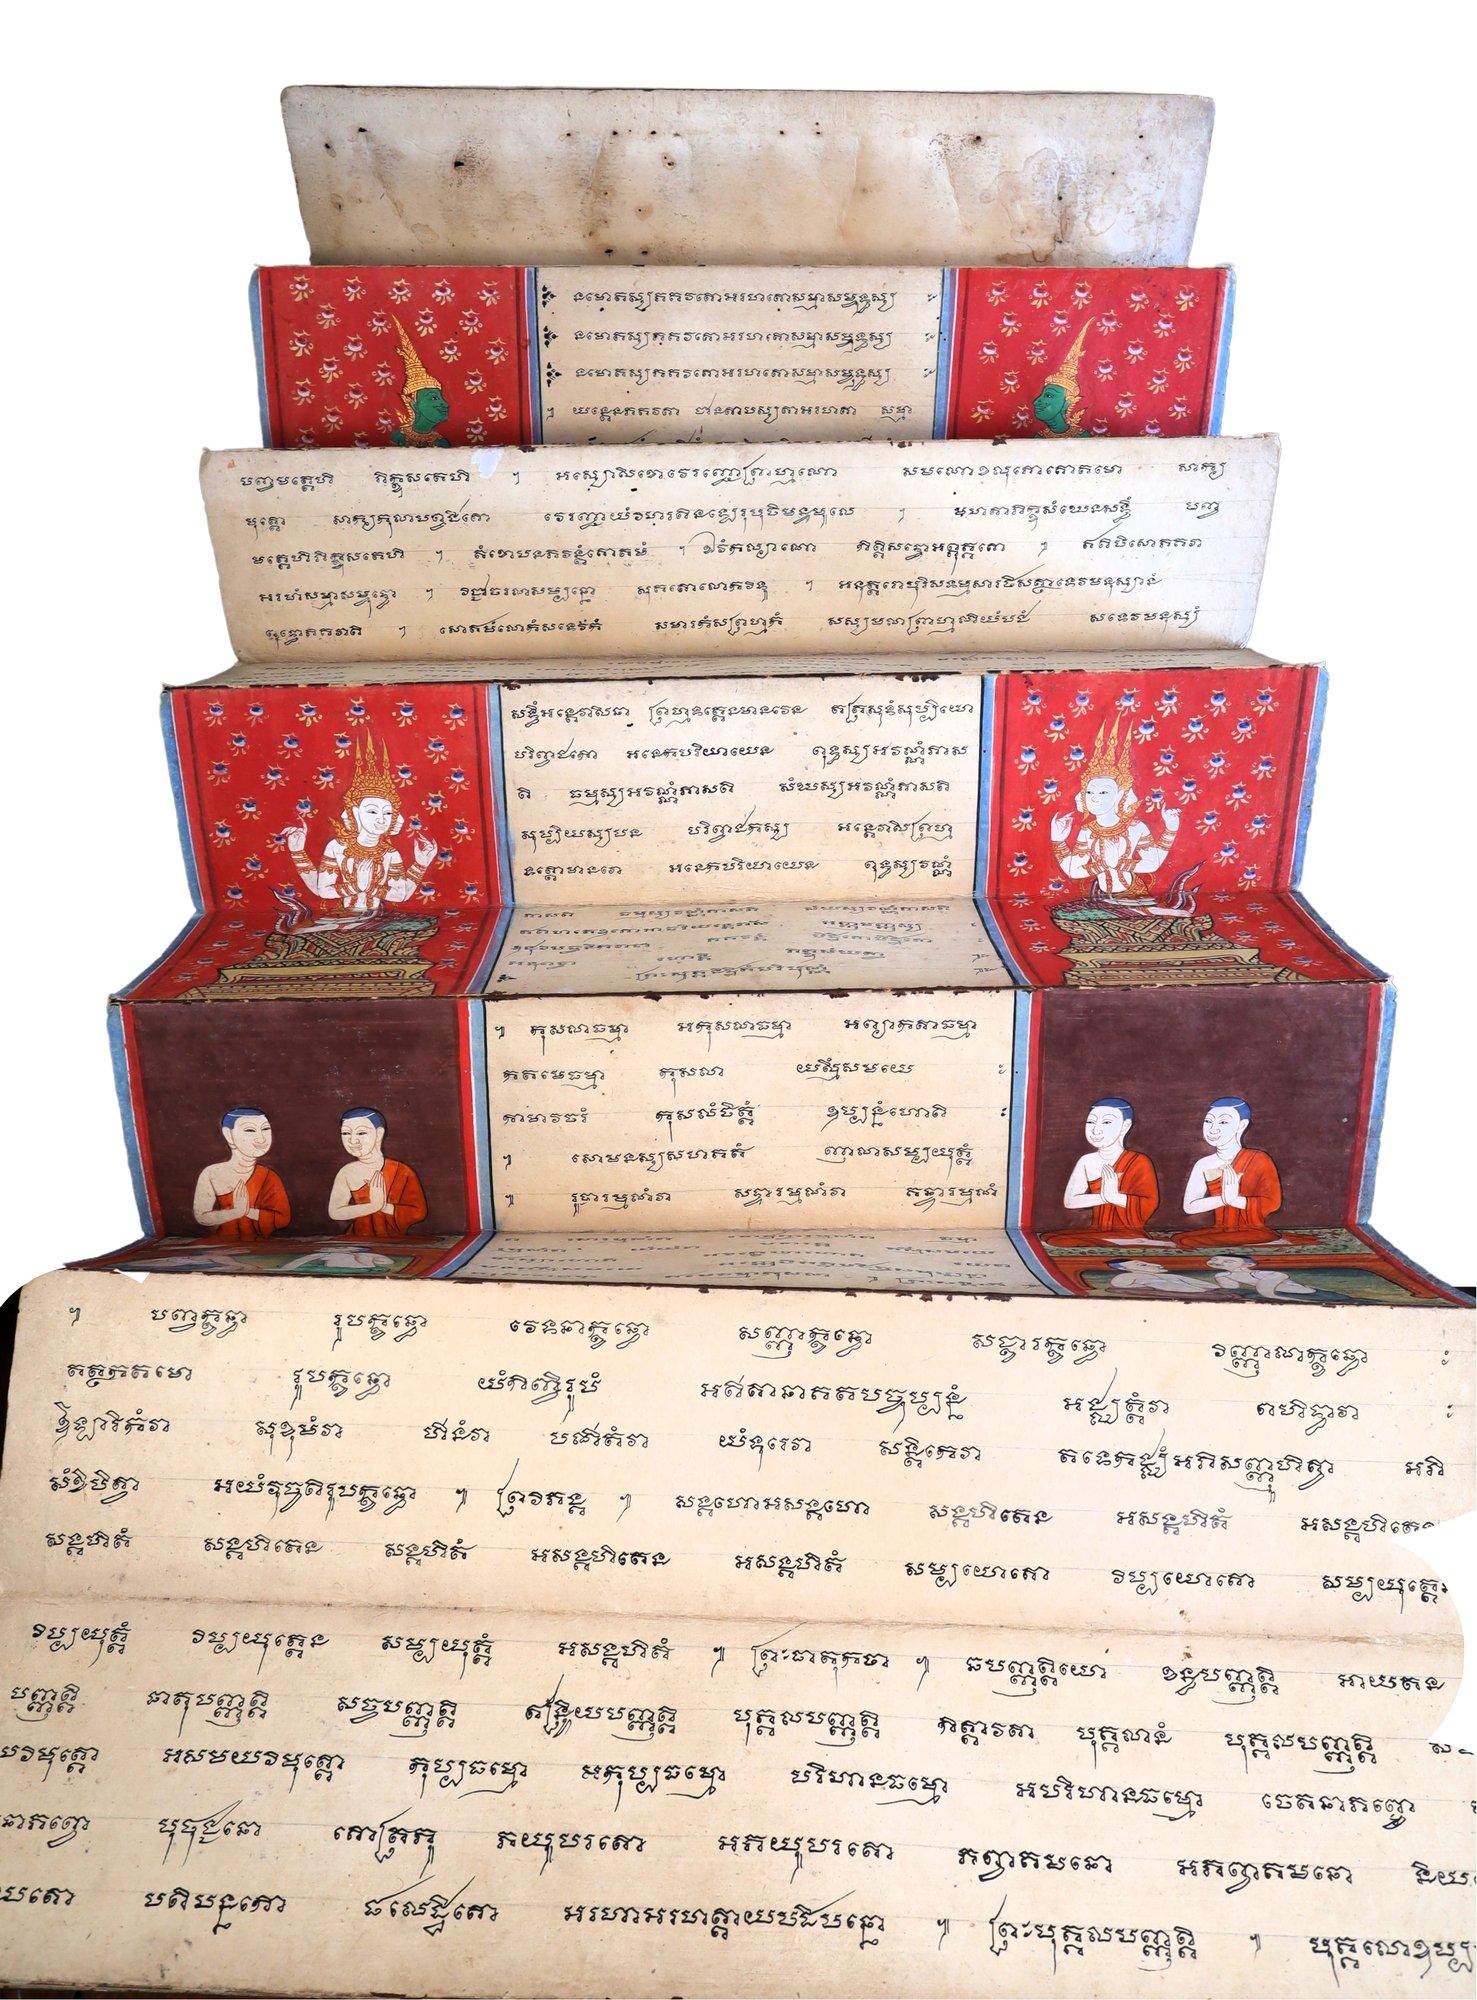 A rare mid-19th century Phra Malai illustrated Buddhist Manuscript from Thailand, 19th century

Samut khoi accordion-style folding book with lacquered paper cover, narrating the legend of Buddhist monk Phra Malai, popular in Siam -present day